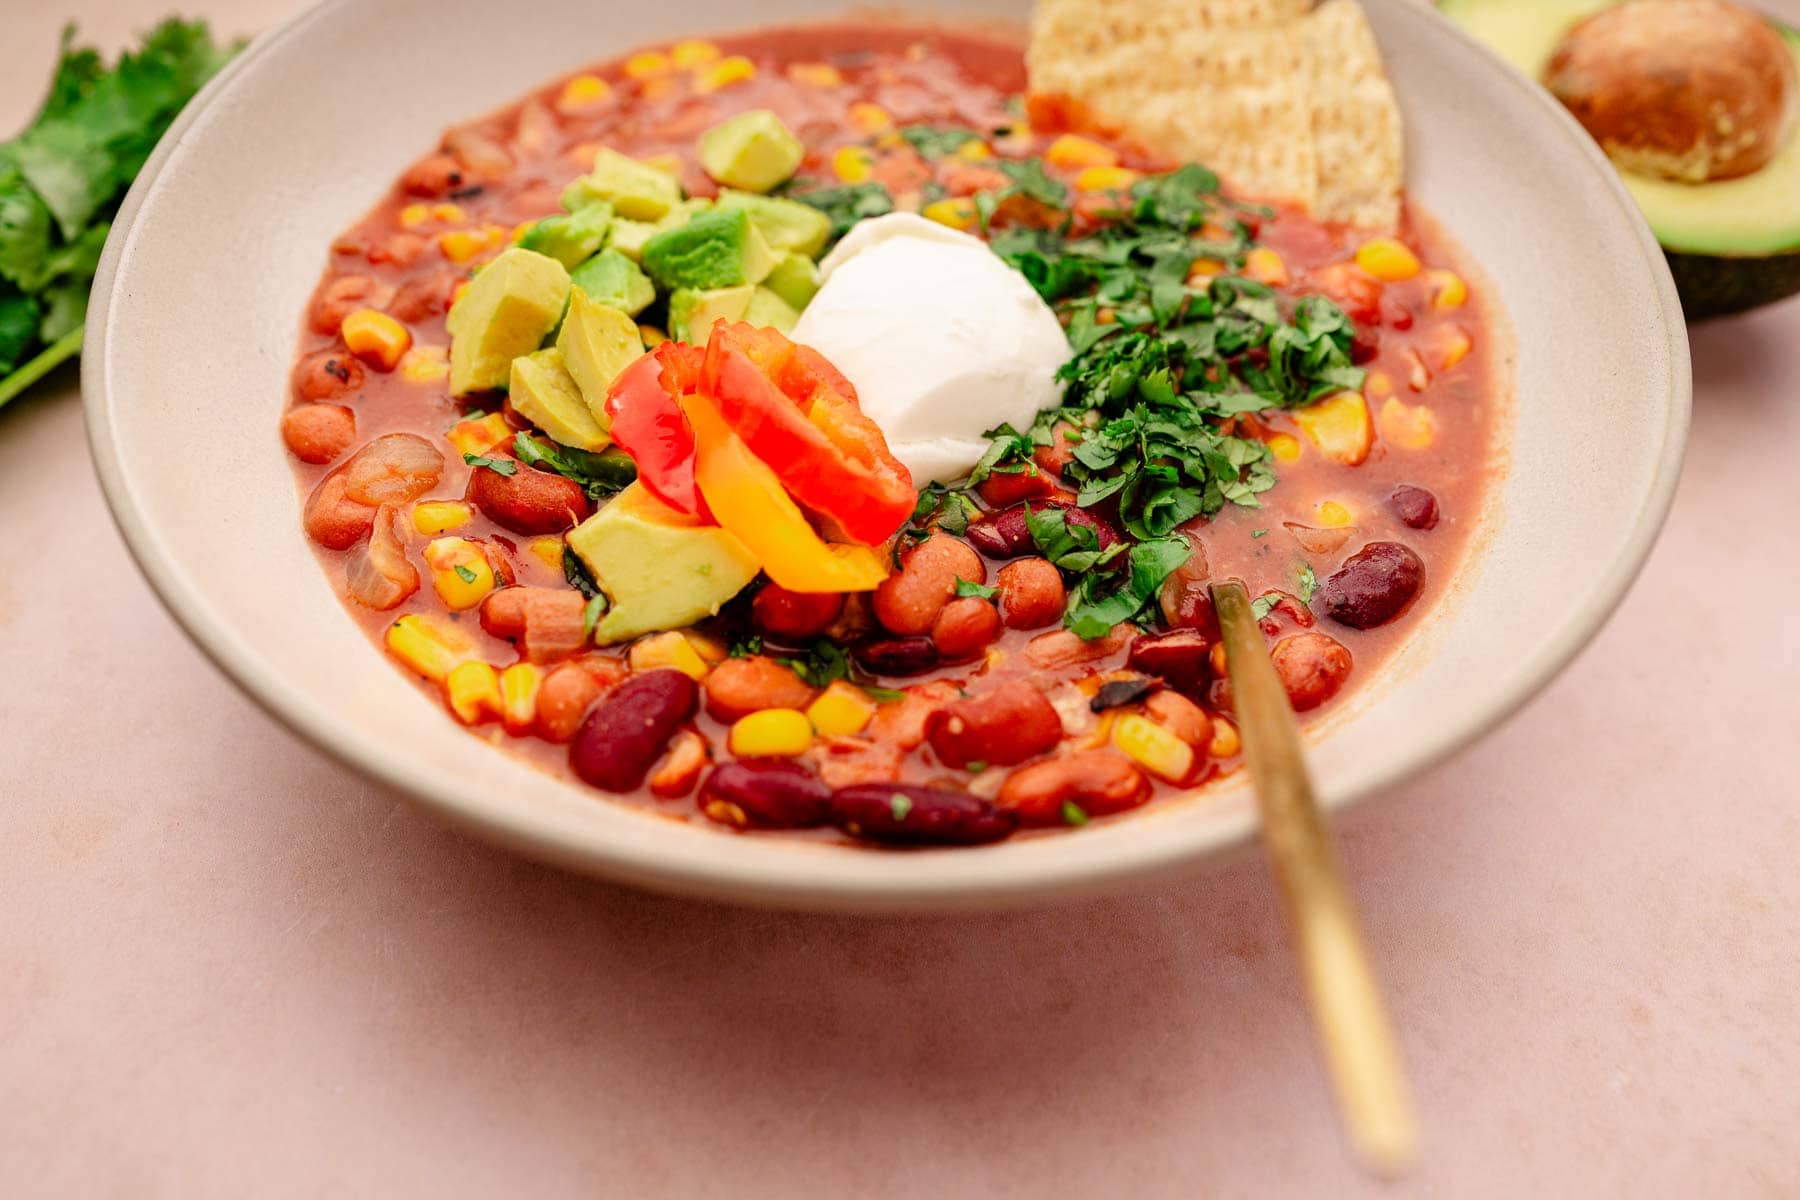 A slow cooker vegetarian chili packed with beans, corn, avocado, and topped with a dollop of sour cream.